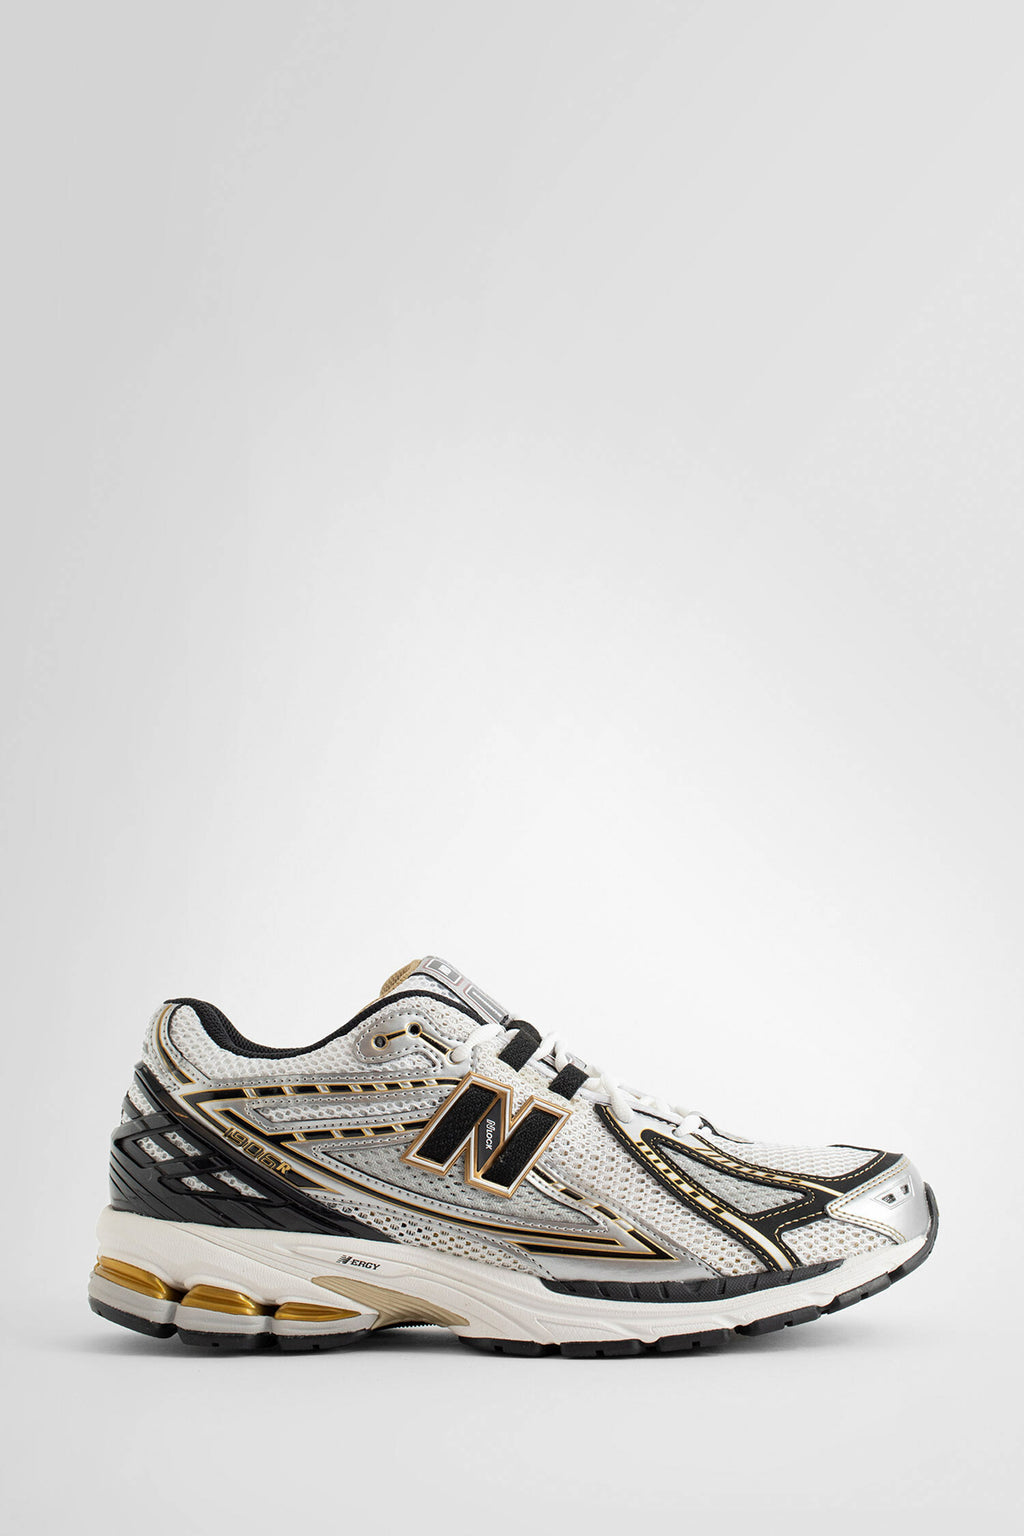 NEW BALANCE UNISEX SILVER SNEAKERS - NEW BALANCE - SNEAKERS ...